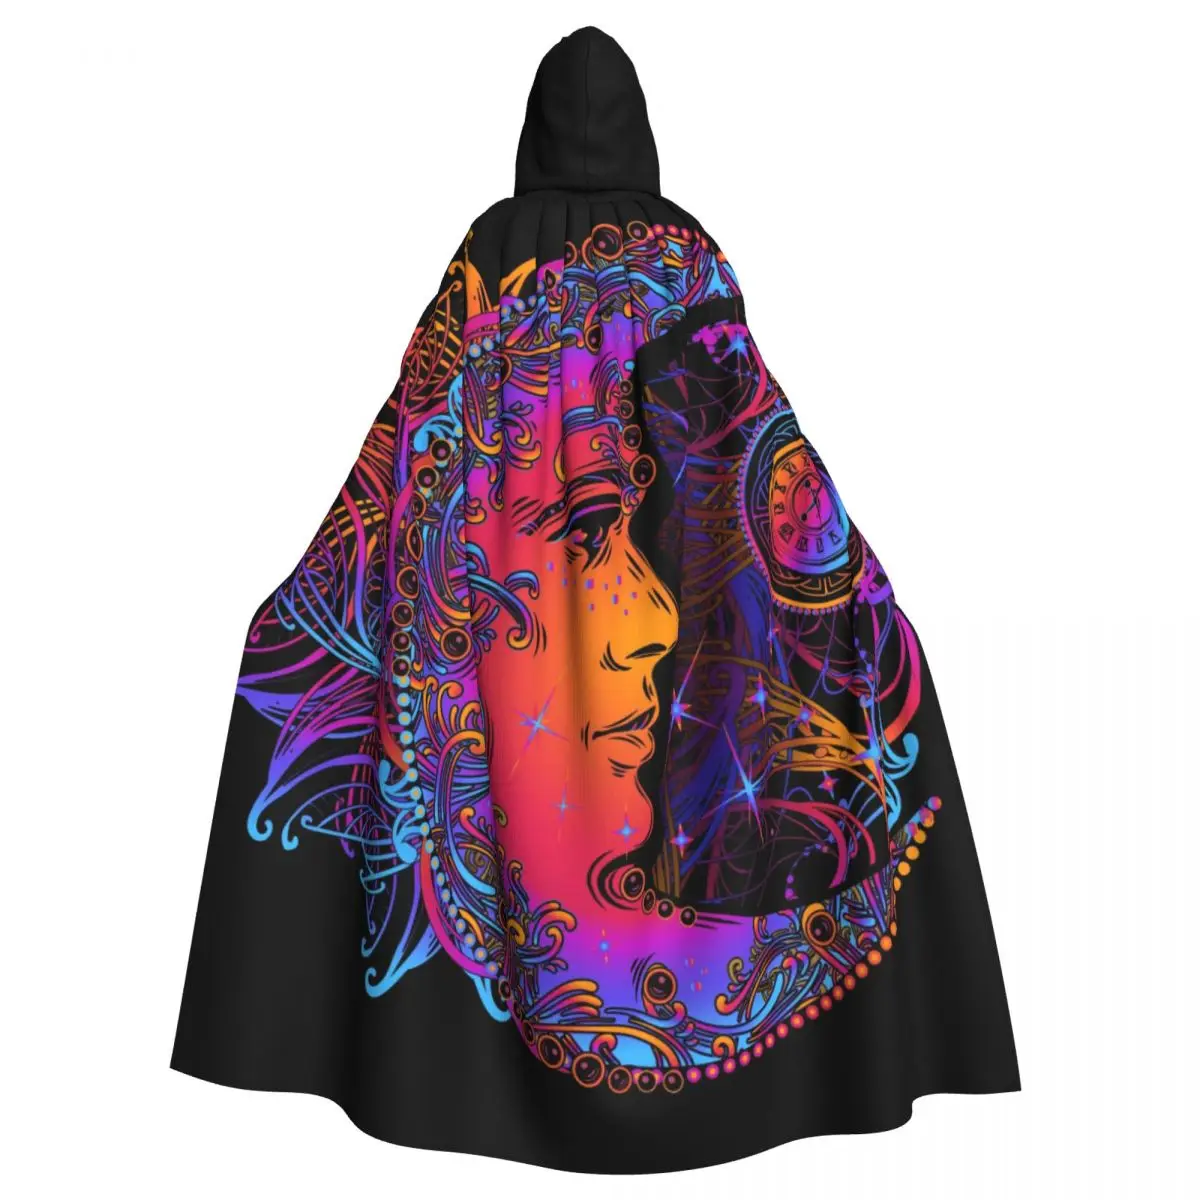 

Unisex Witch Party Reversible Hooded Adult Vampires Cape Cloak Golden Crescent Moon And Sun With Mandala